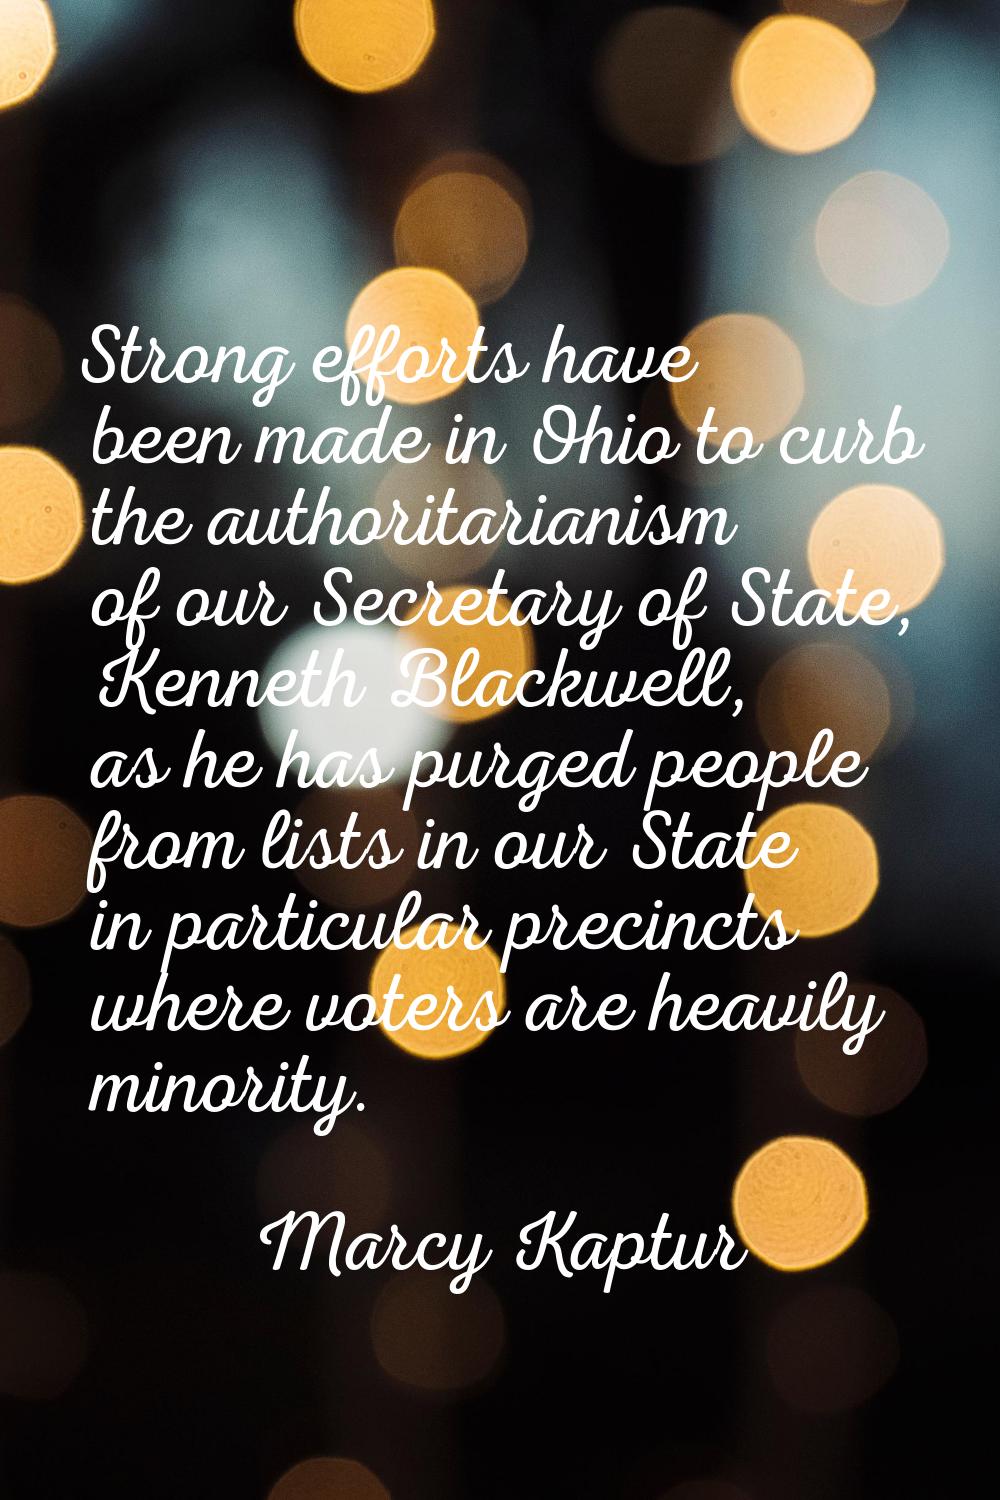 Strong efforts have been made in Ohio to curb the authoritarianism of our Secretary of State, Kenne